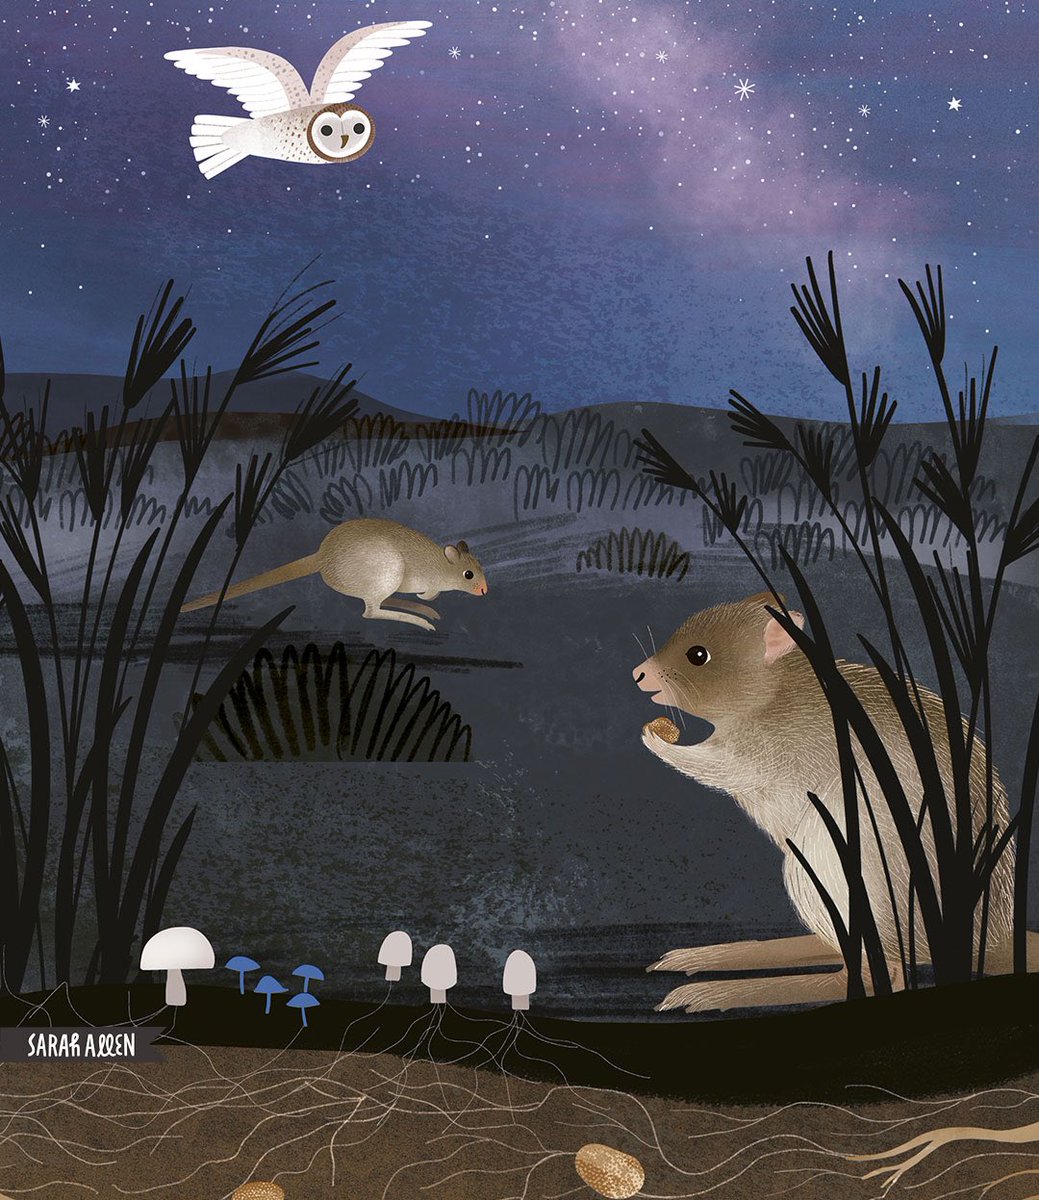 Bettongs eating truffles and spreading mycelium from my picture book Jumping Joeys. Now available in board book edition from Kmart and other book retailers. Feels like a subversive act of gentle activism. My dream making environmental education mainstream. @EuanRitchie1